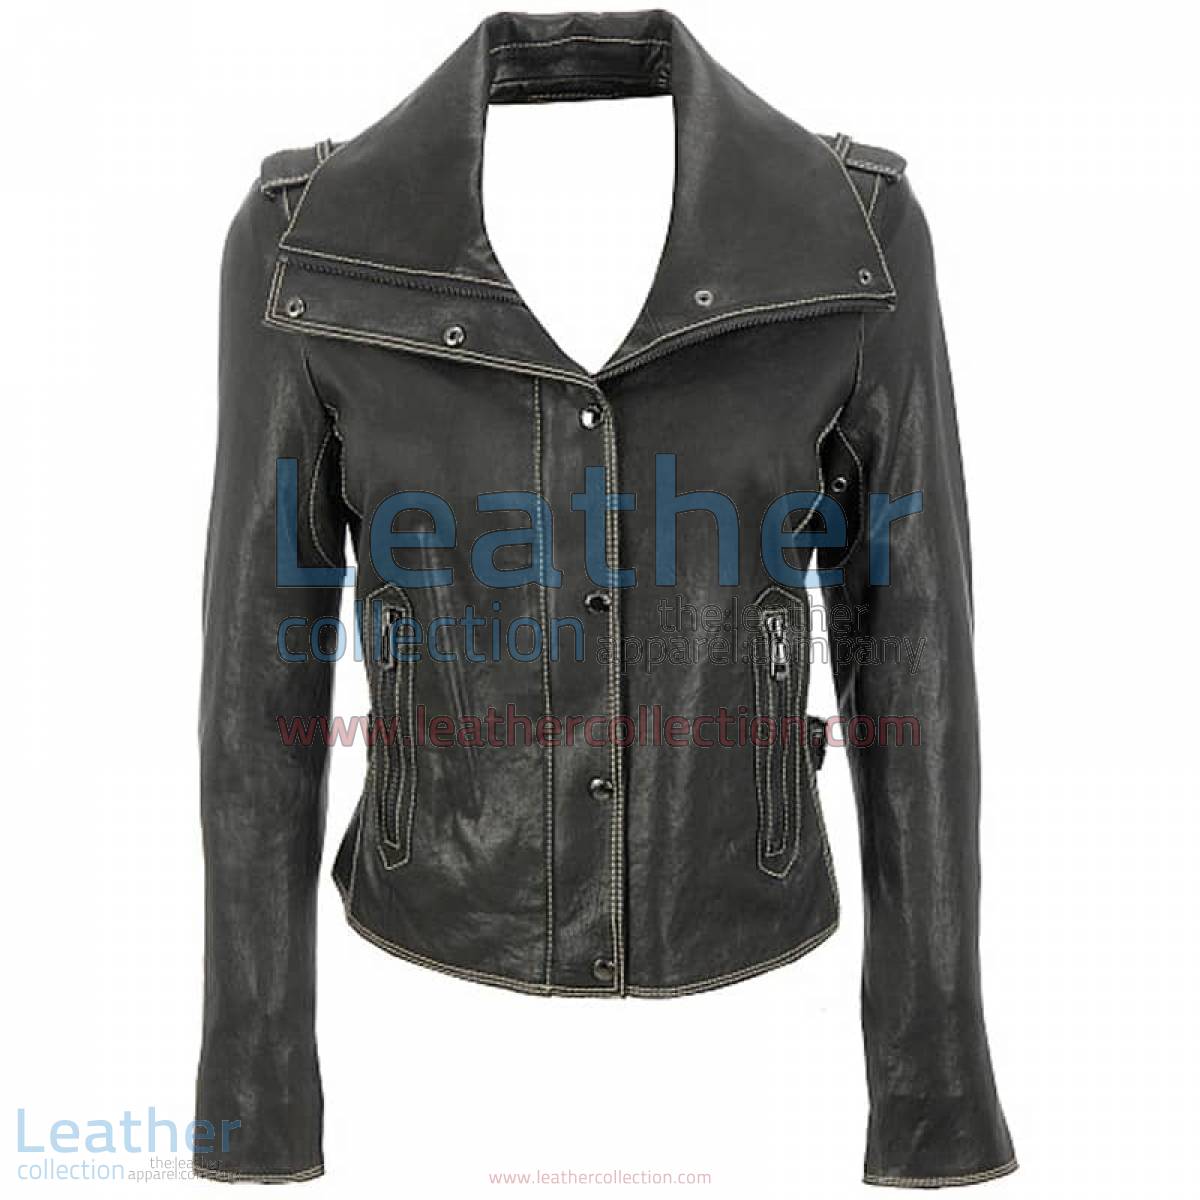 Wing Collar Jacket Leather | jacket leather,wing collar jacket